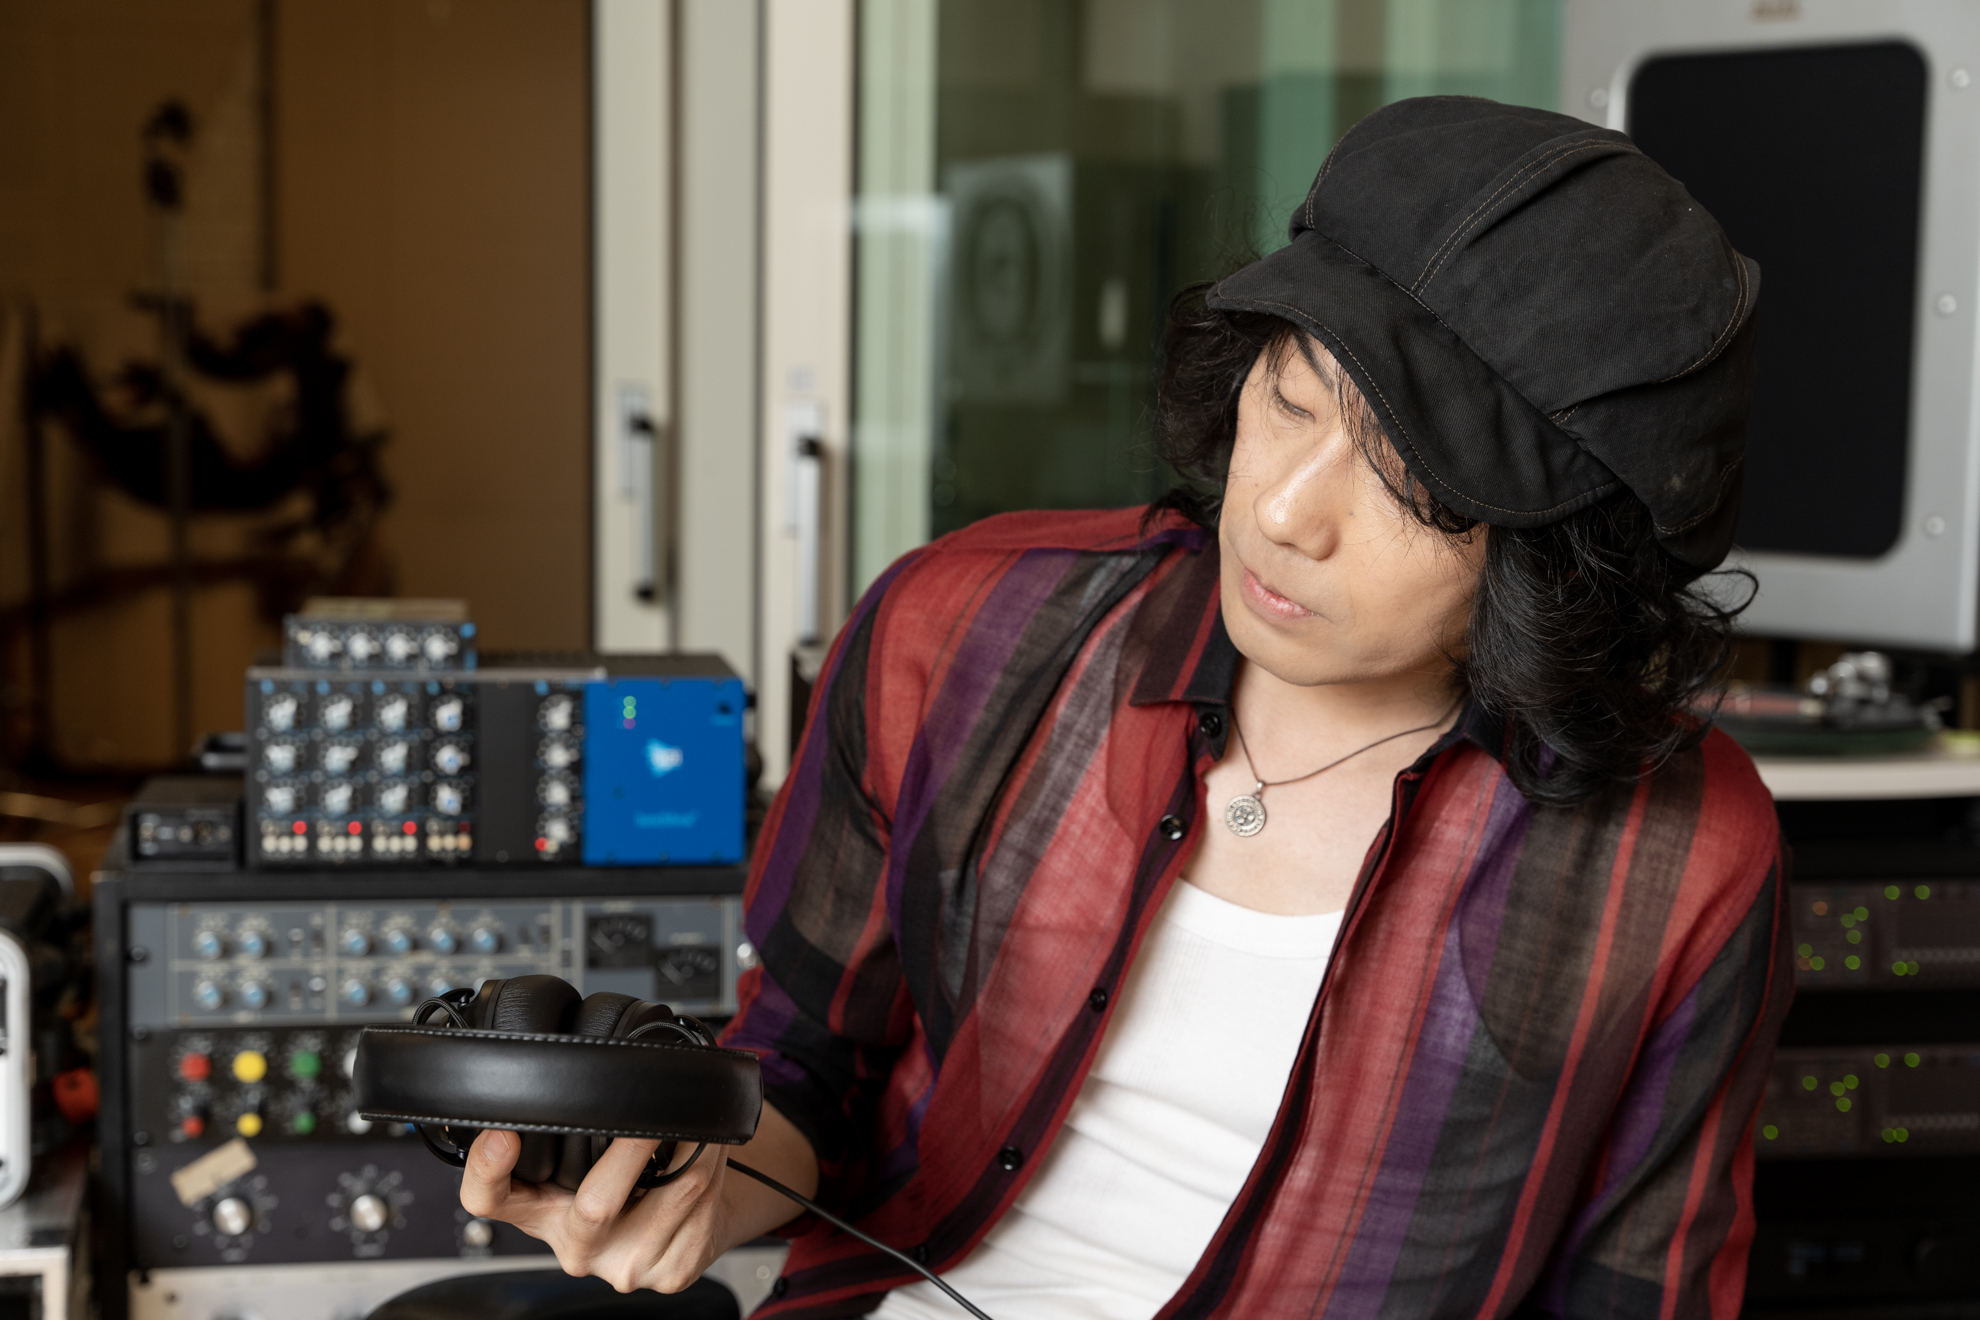 NAOKI（LOVE PSYCHEDELICO）with JBL CLUB ONE ハイブリッド ノイズキャンセリング ヘッドホン